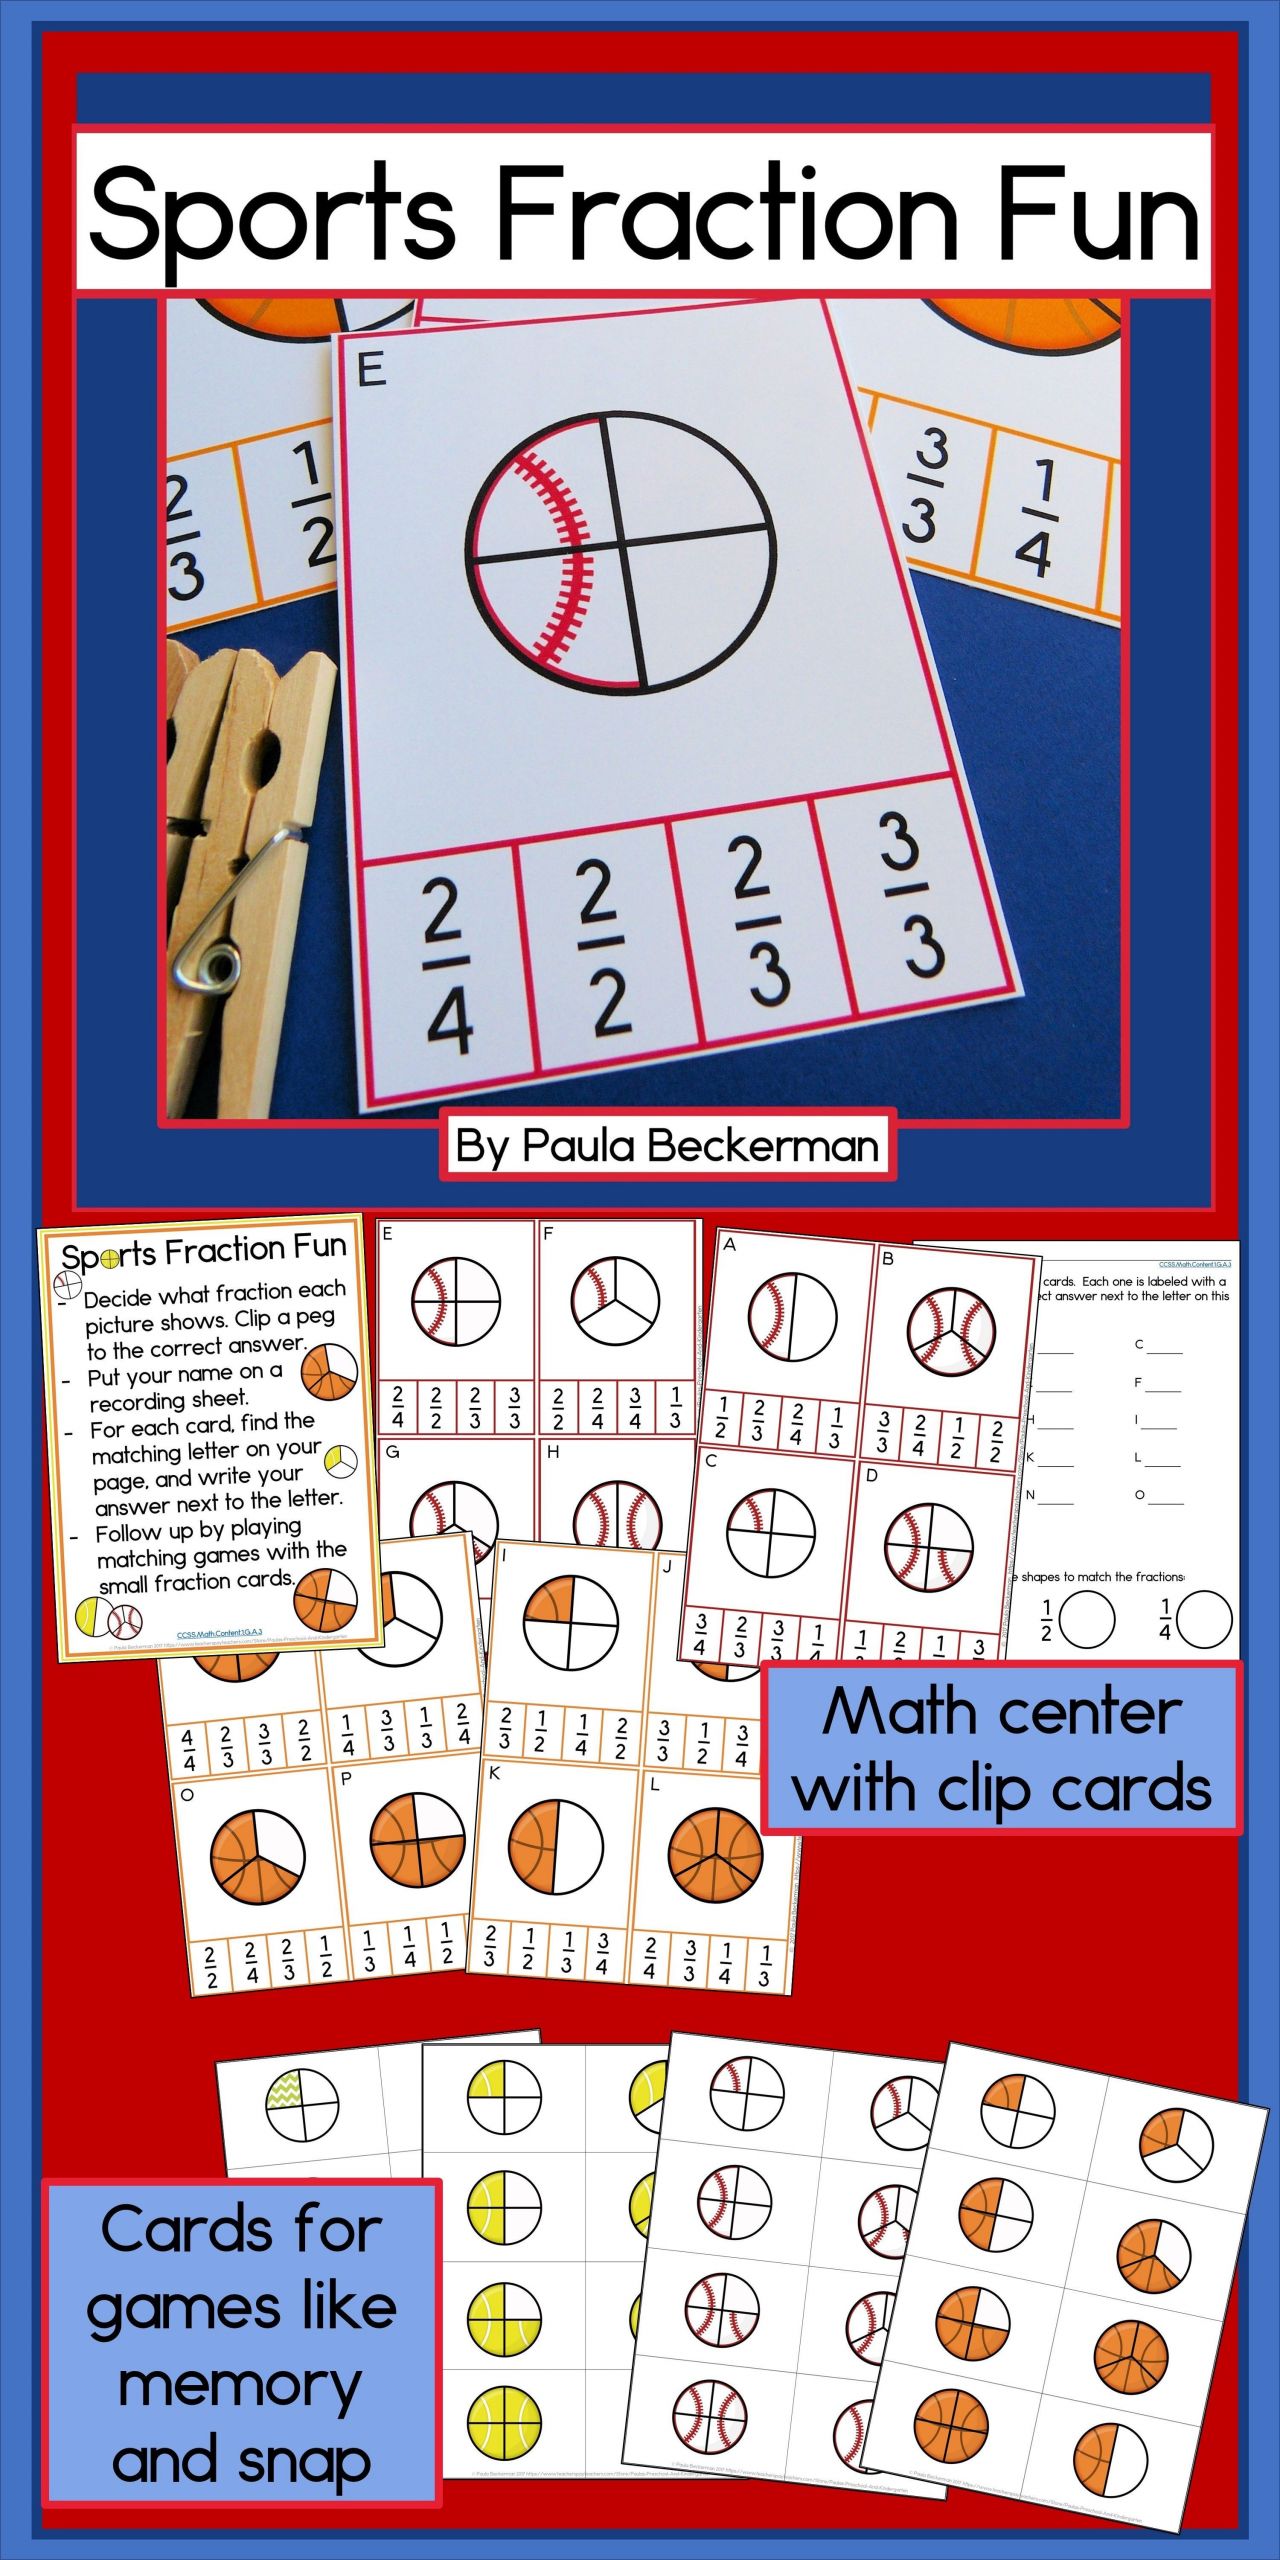 18 fun printable math worksheets printable math center games for first grade valid first grade math worksheets fractions best sports fraction